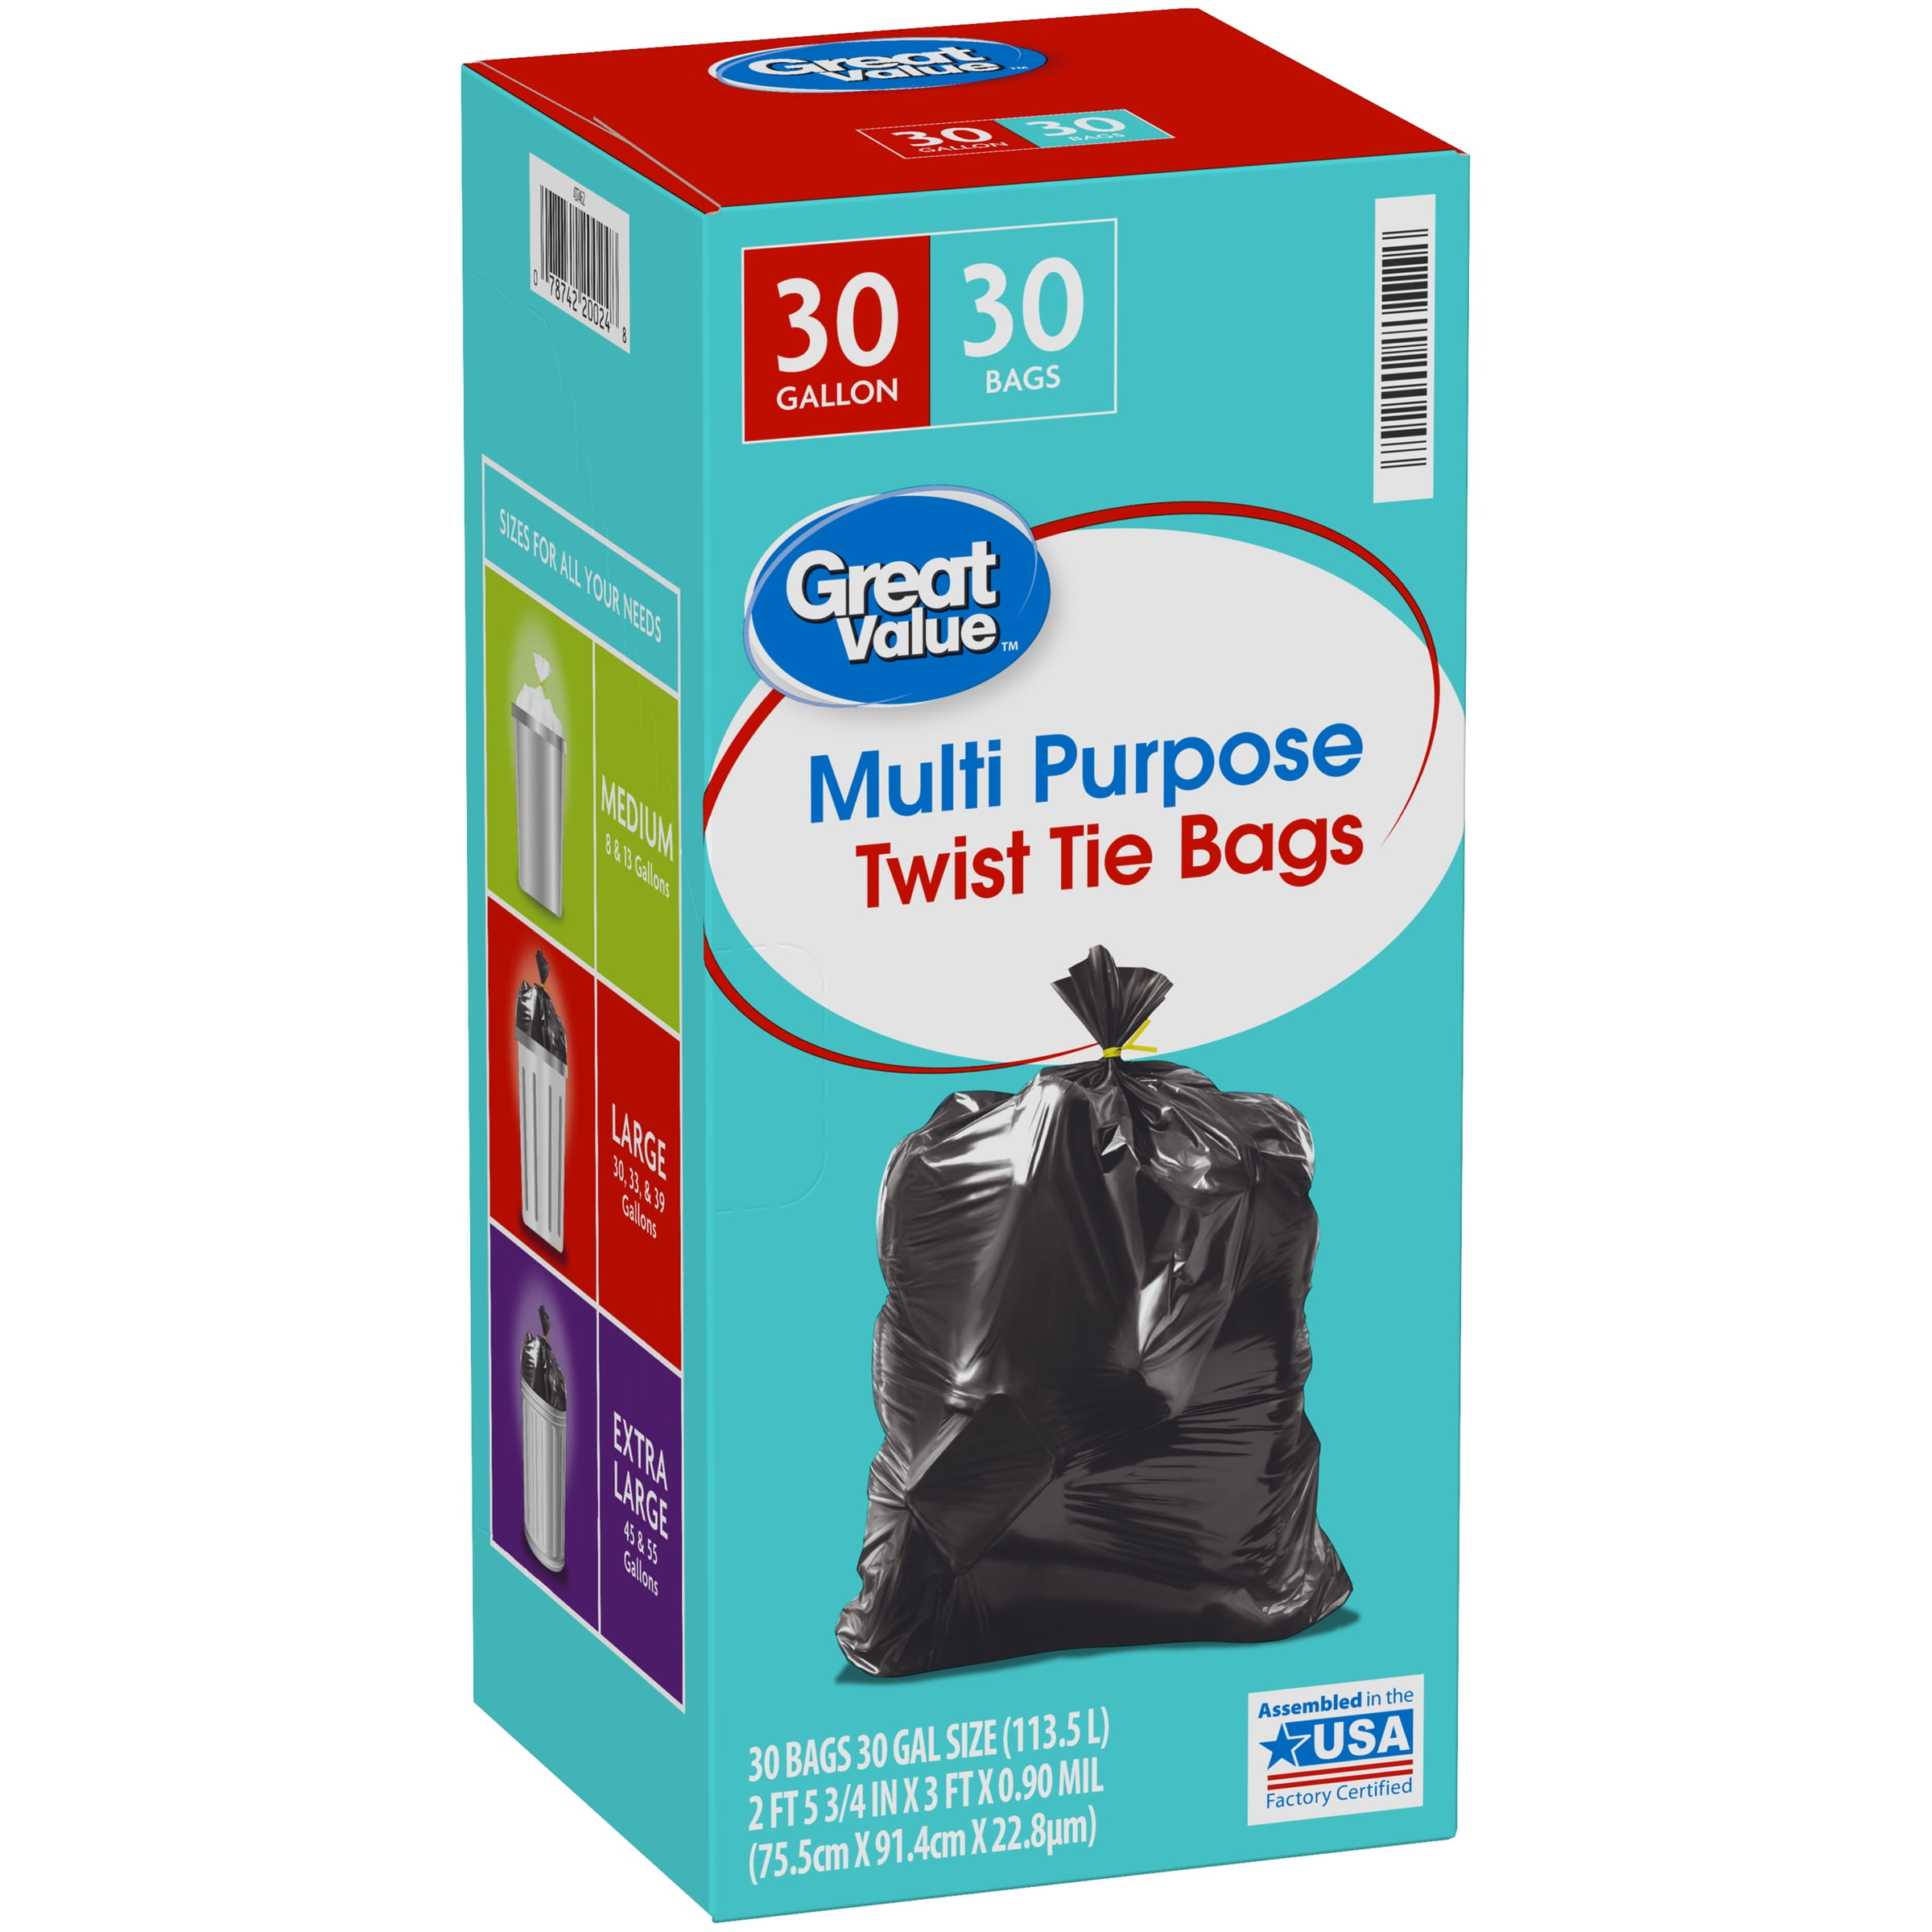 Simply Value - Simply Value, Trash Bags, Clear, with Twist Ties, 45 Gallon  (90 count)